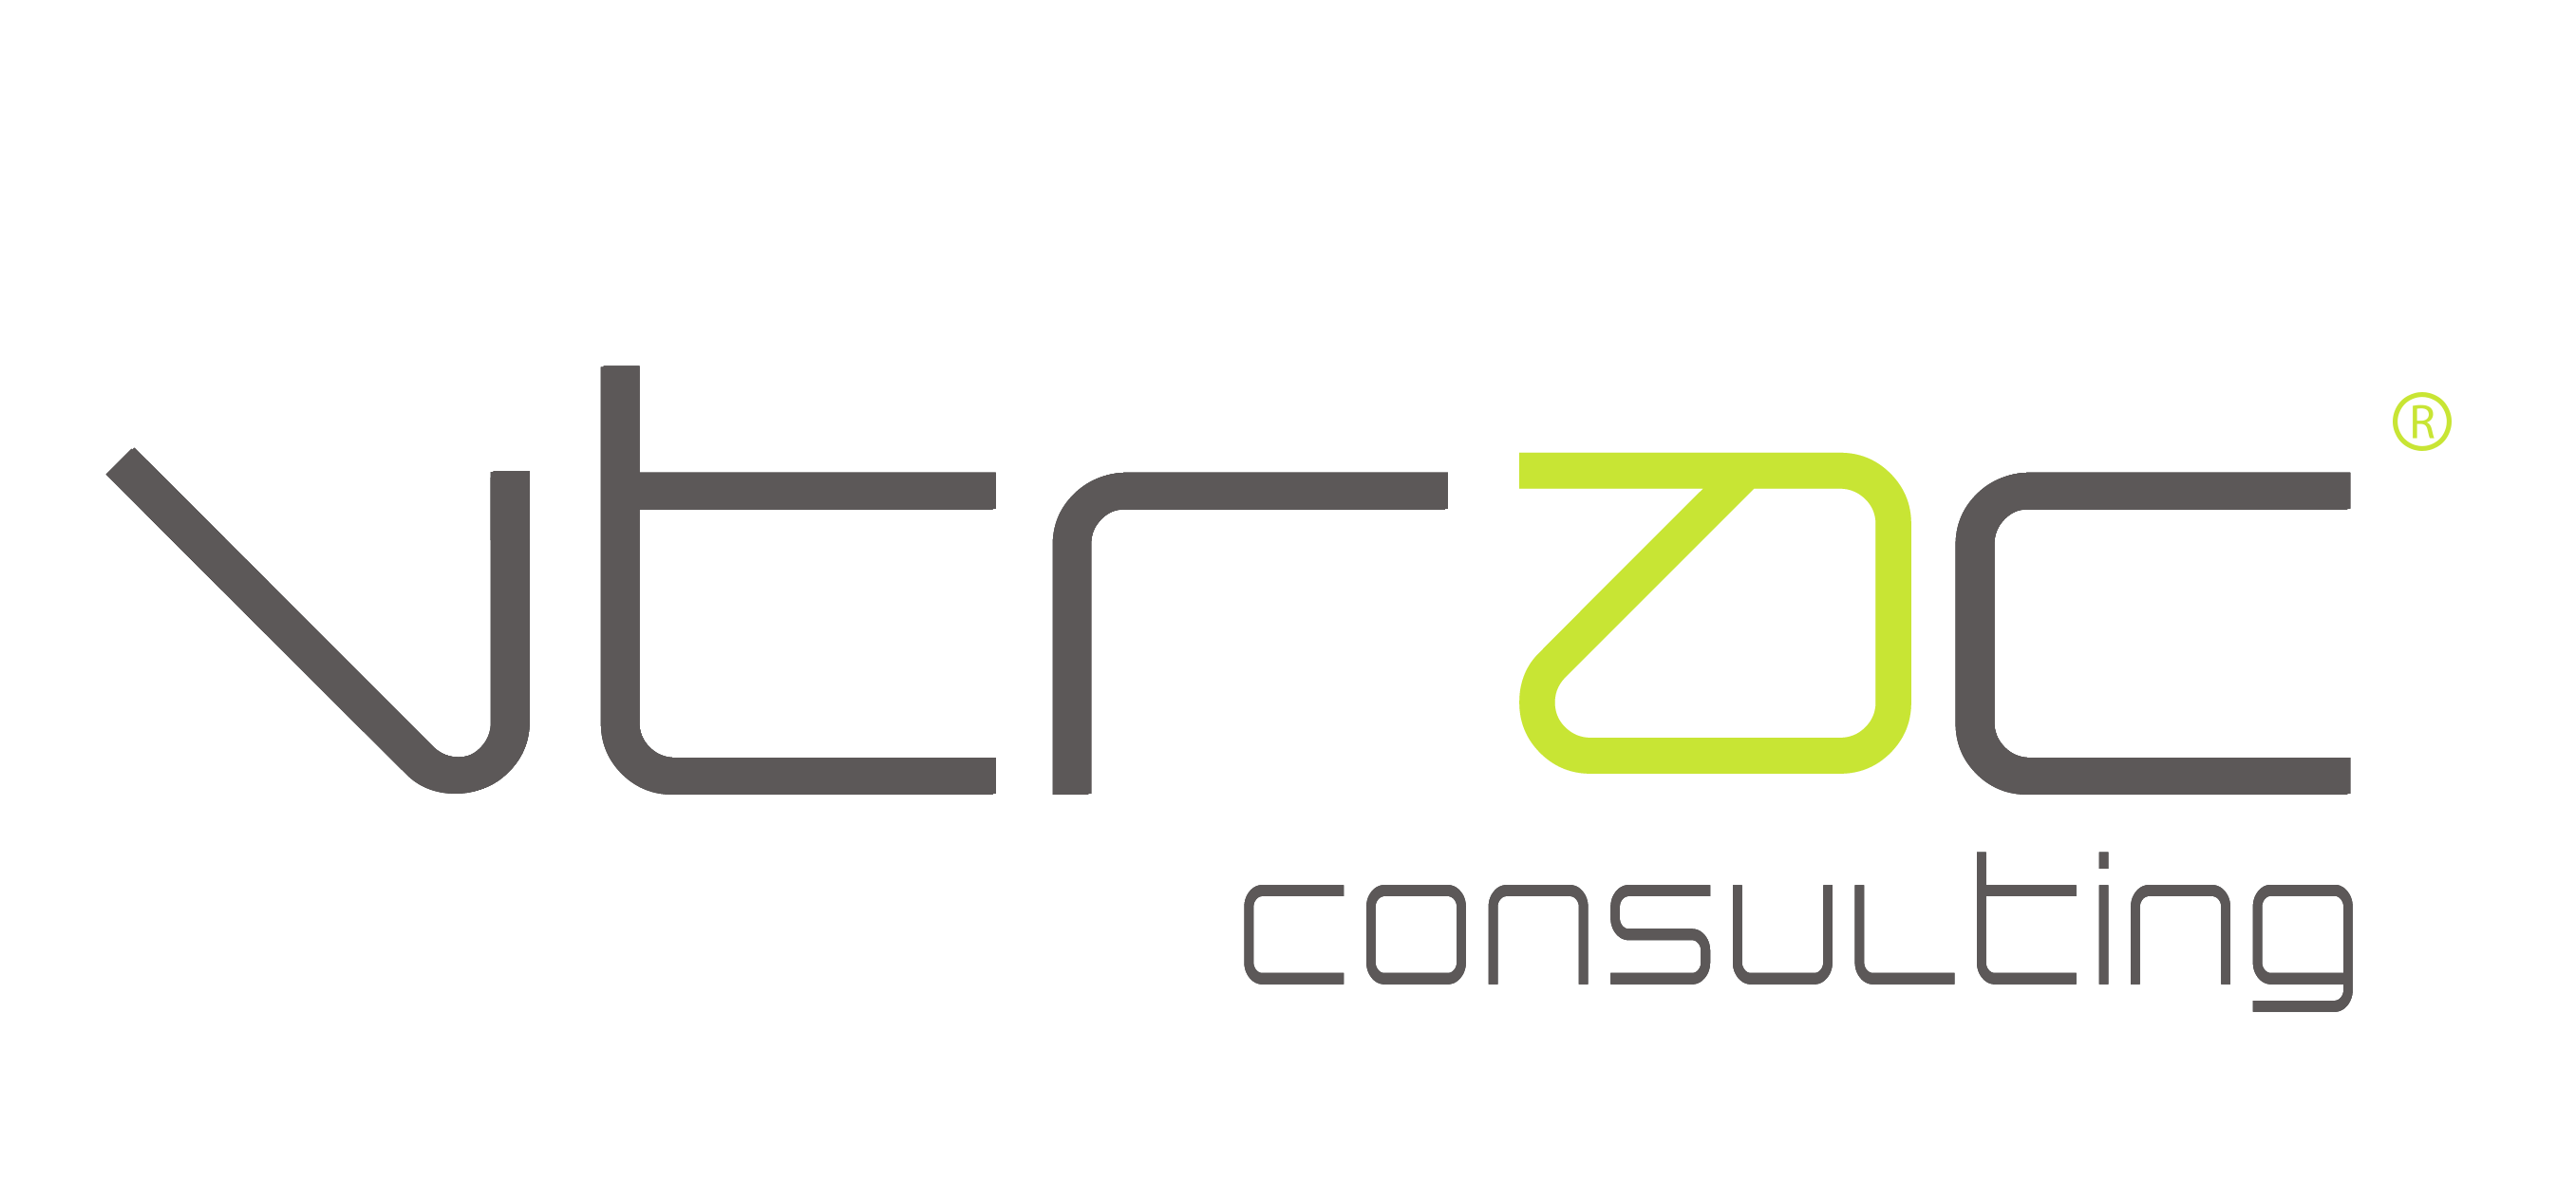 VTRAC Consulting Corporation